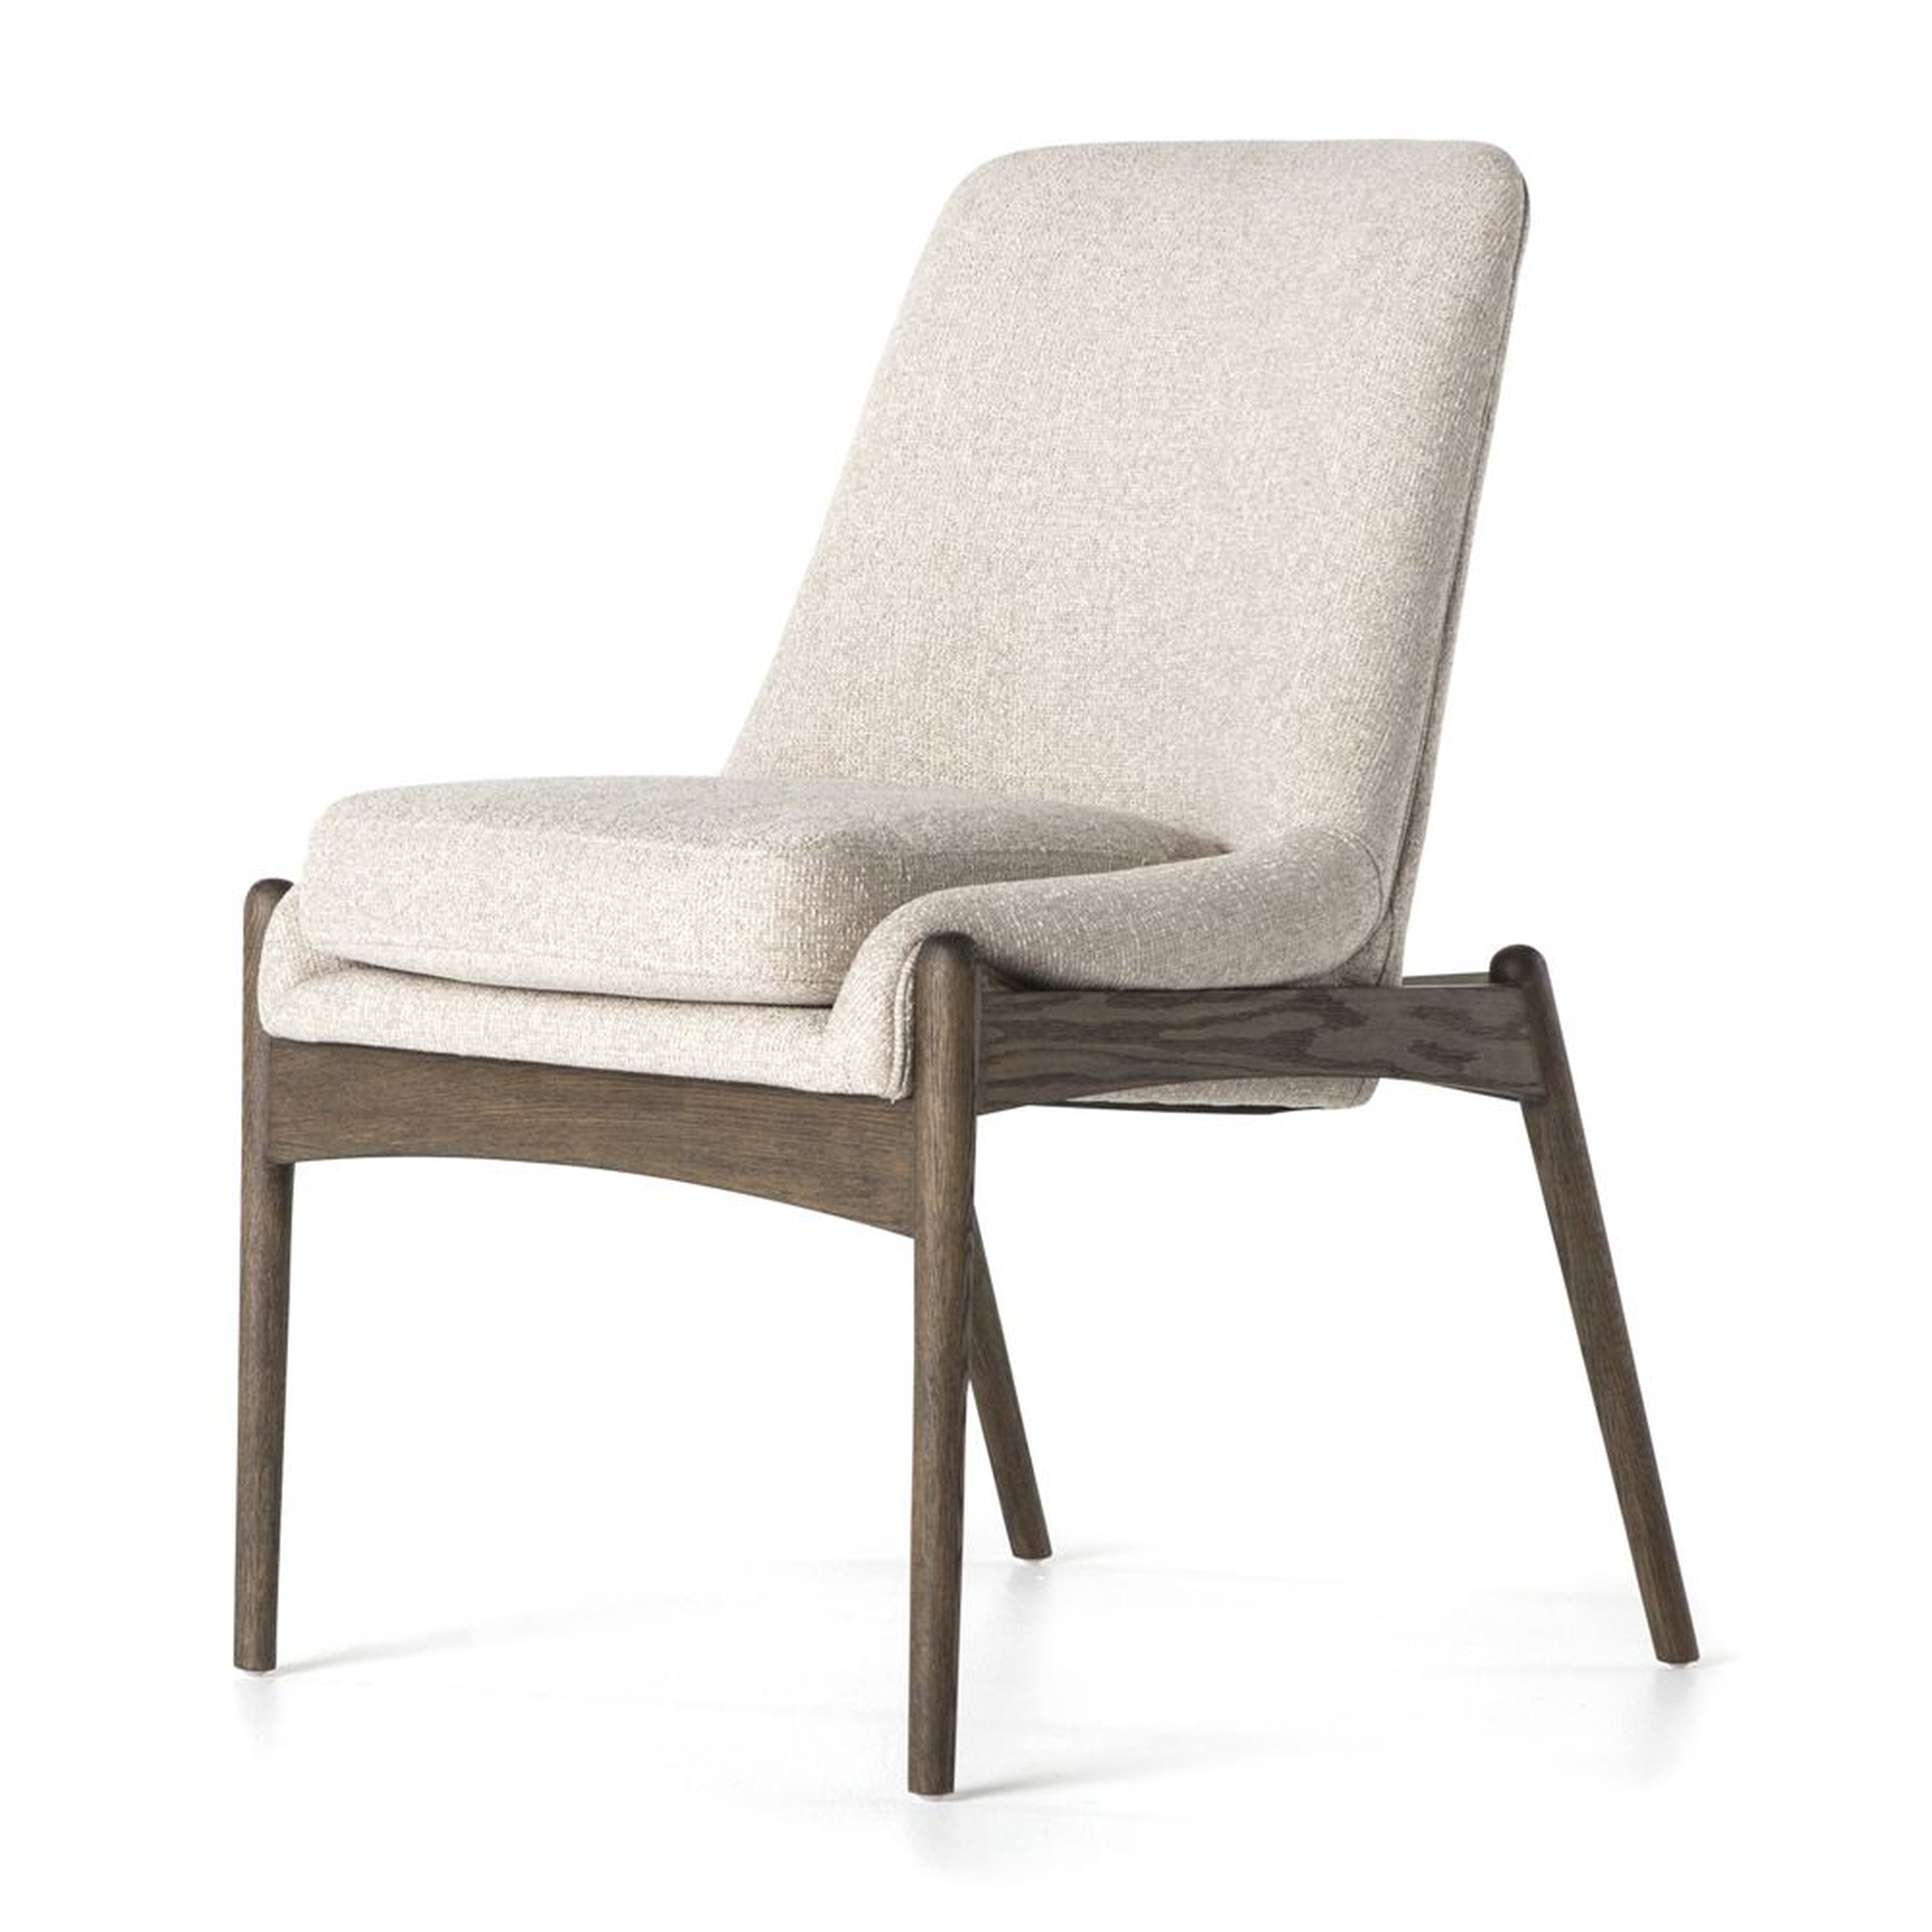 Braden Midcentury Dining Chair - Crate and Barrel